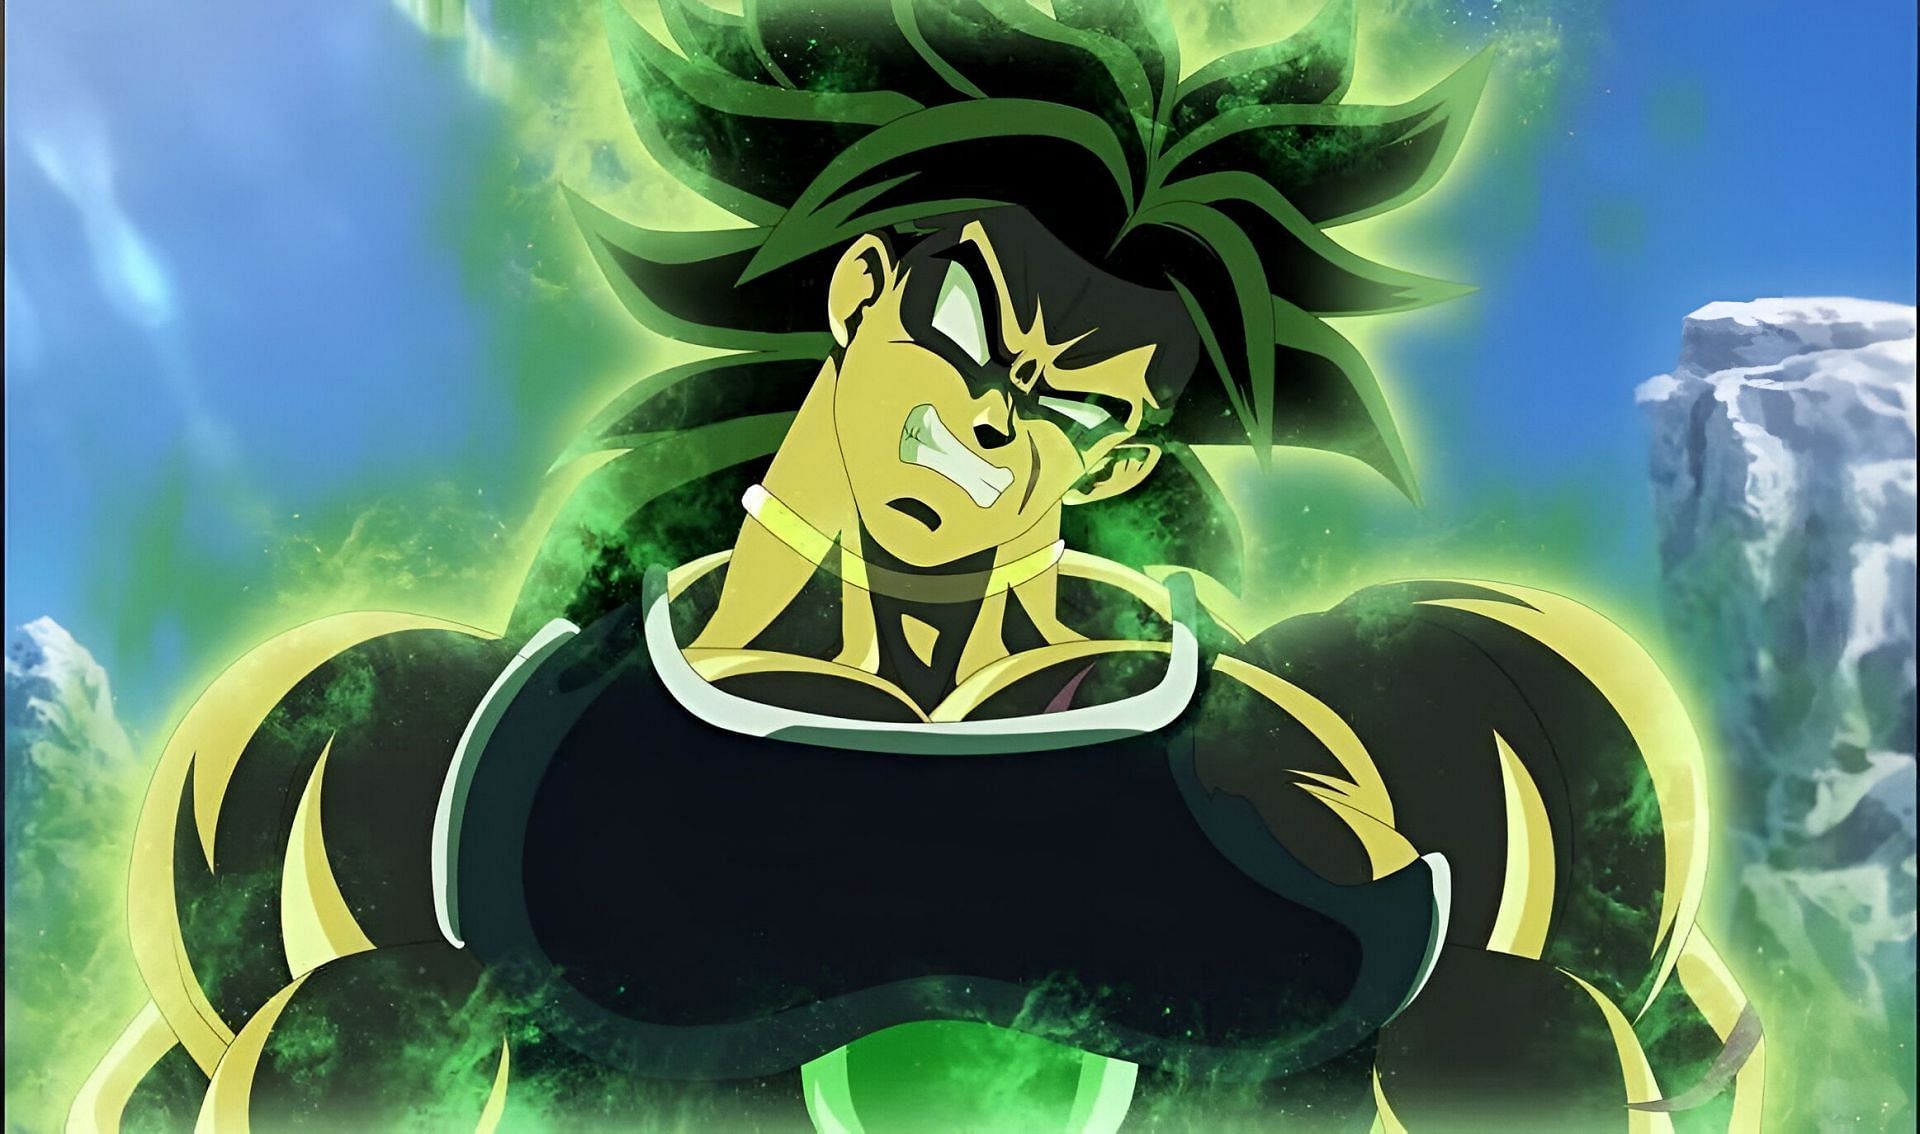 The legendary Super Saiyan as seen in the anime (Image via Toei Animation)